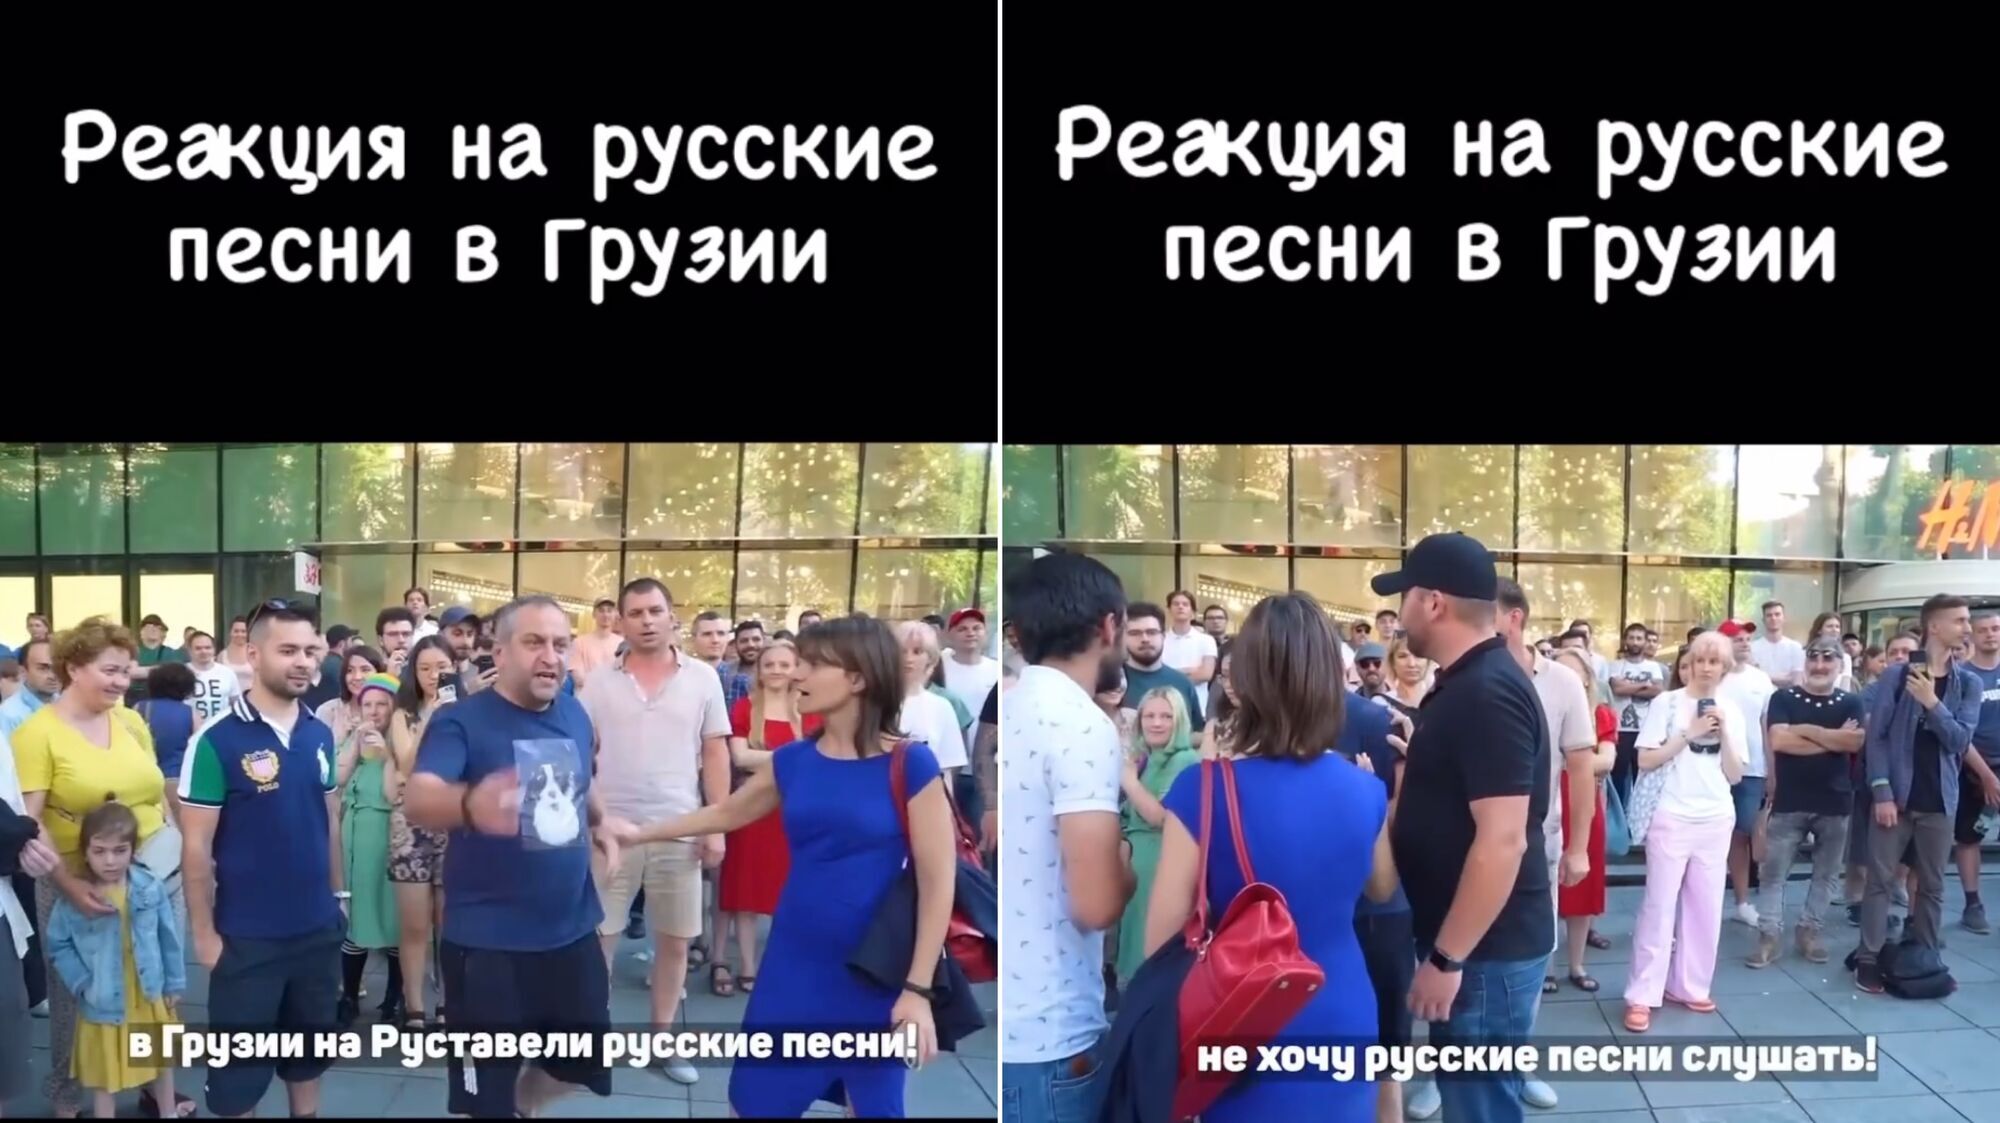 ''Russian ship, f*ck you'': in Georgia, a man attacks a singer of Russian songs. Video